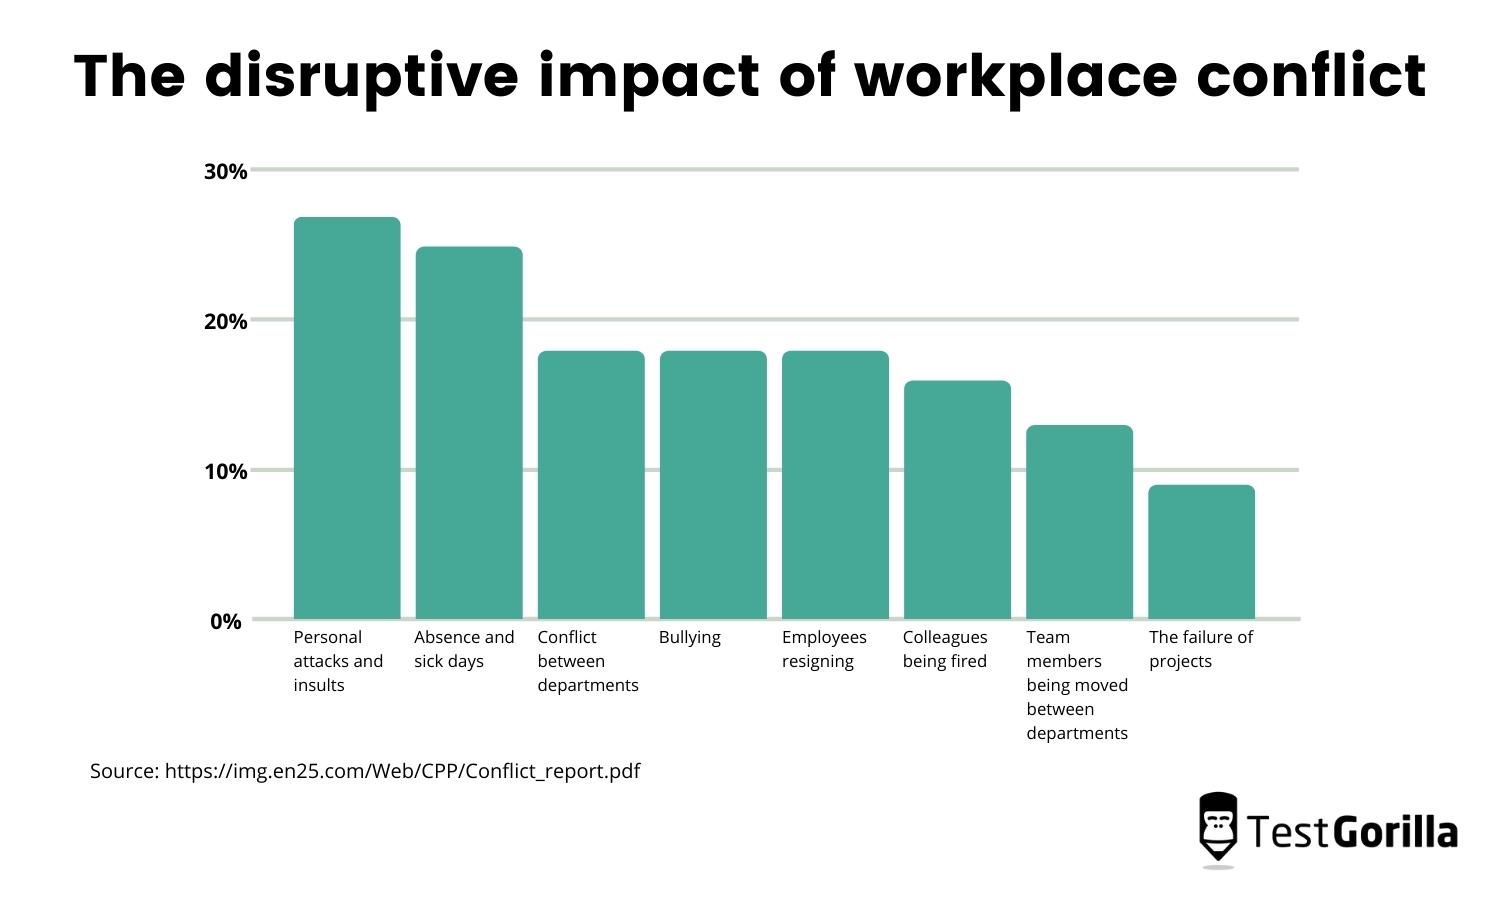 bar chart showing the disruptive impact of workplace conflict